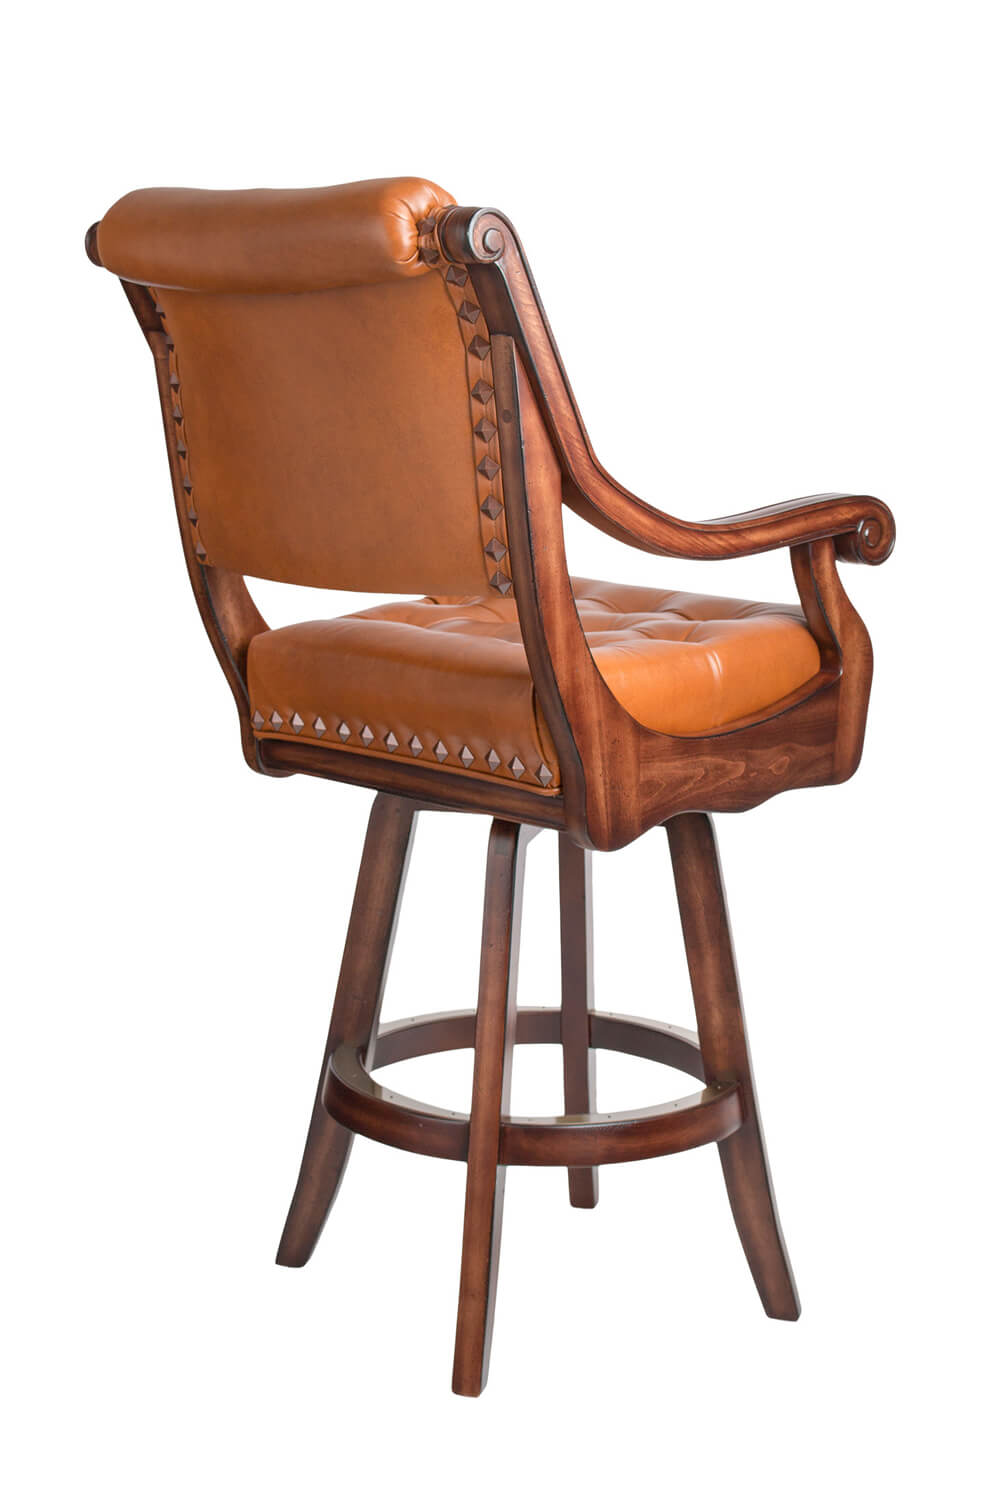 Ponce De Leon Wood Arm Swivel Stool, Wooden Swivel Bar Stools With Backs And Arms